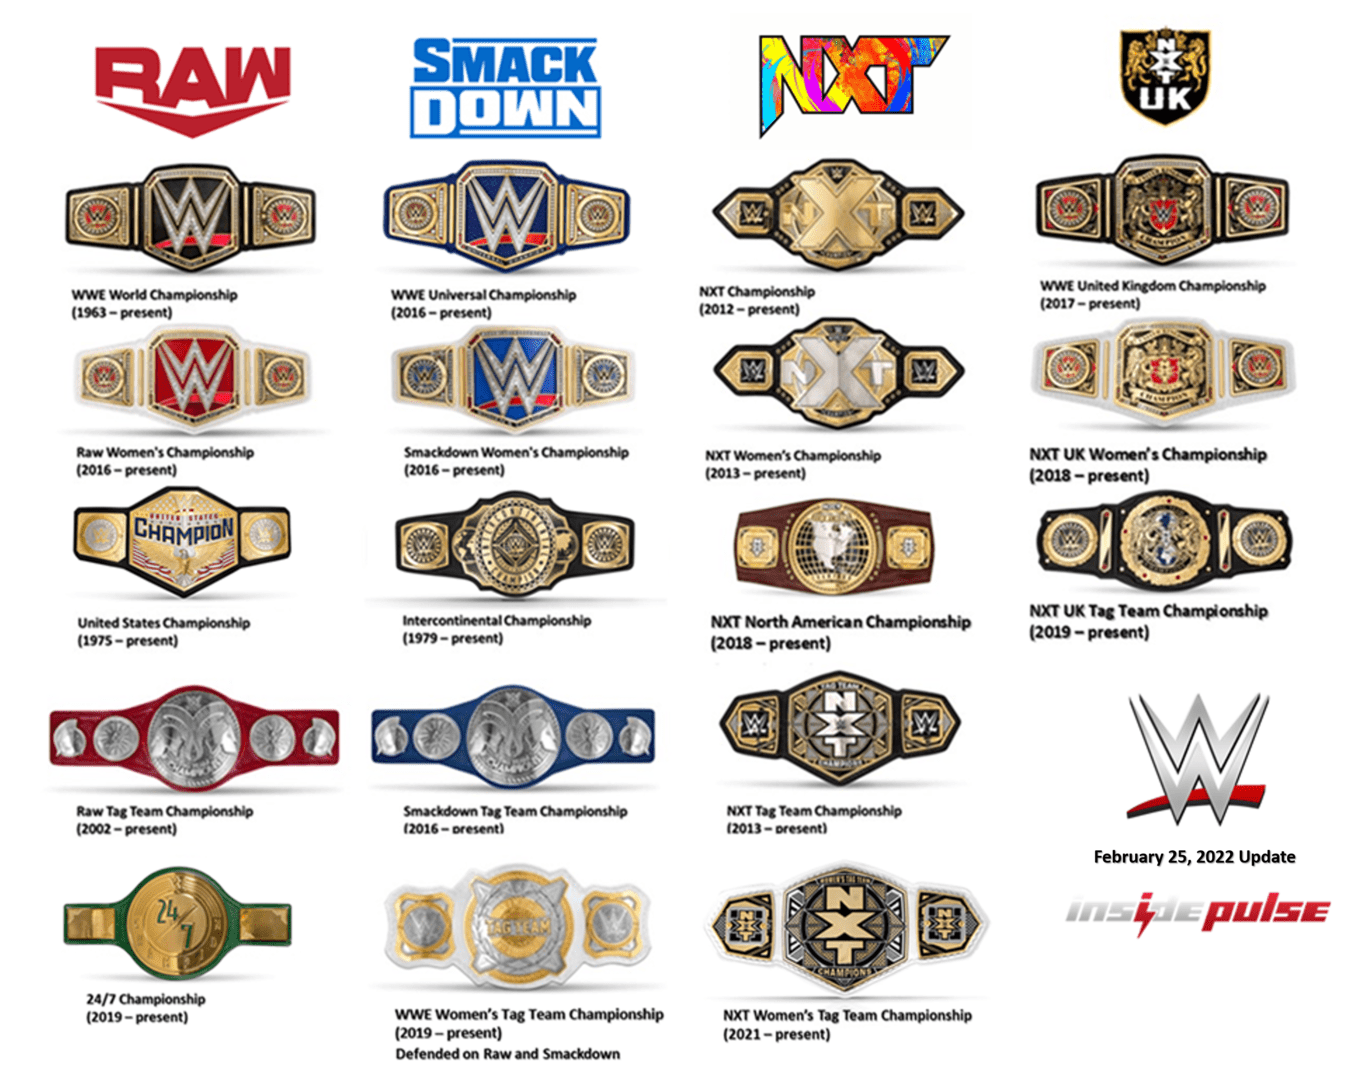 WWE Championship Belts Contract To 18 For Raw, Smackdown, NXT & NXT UK